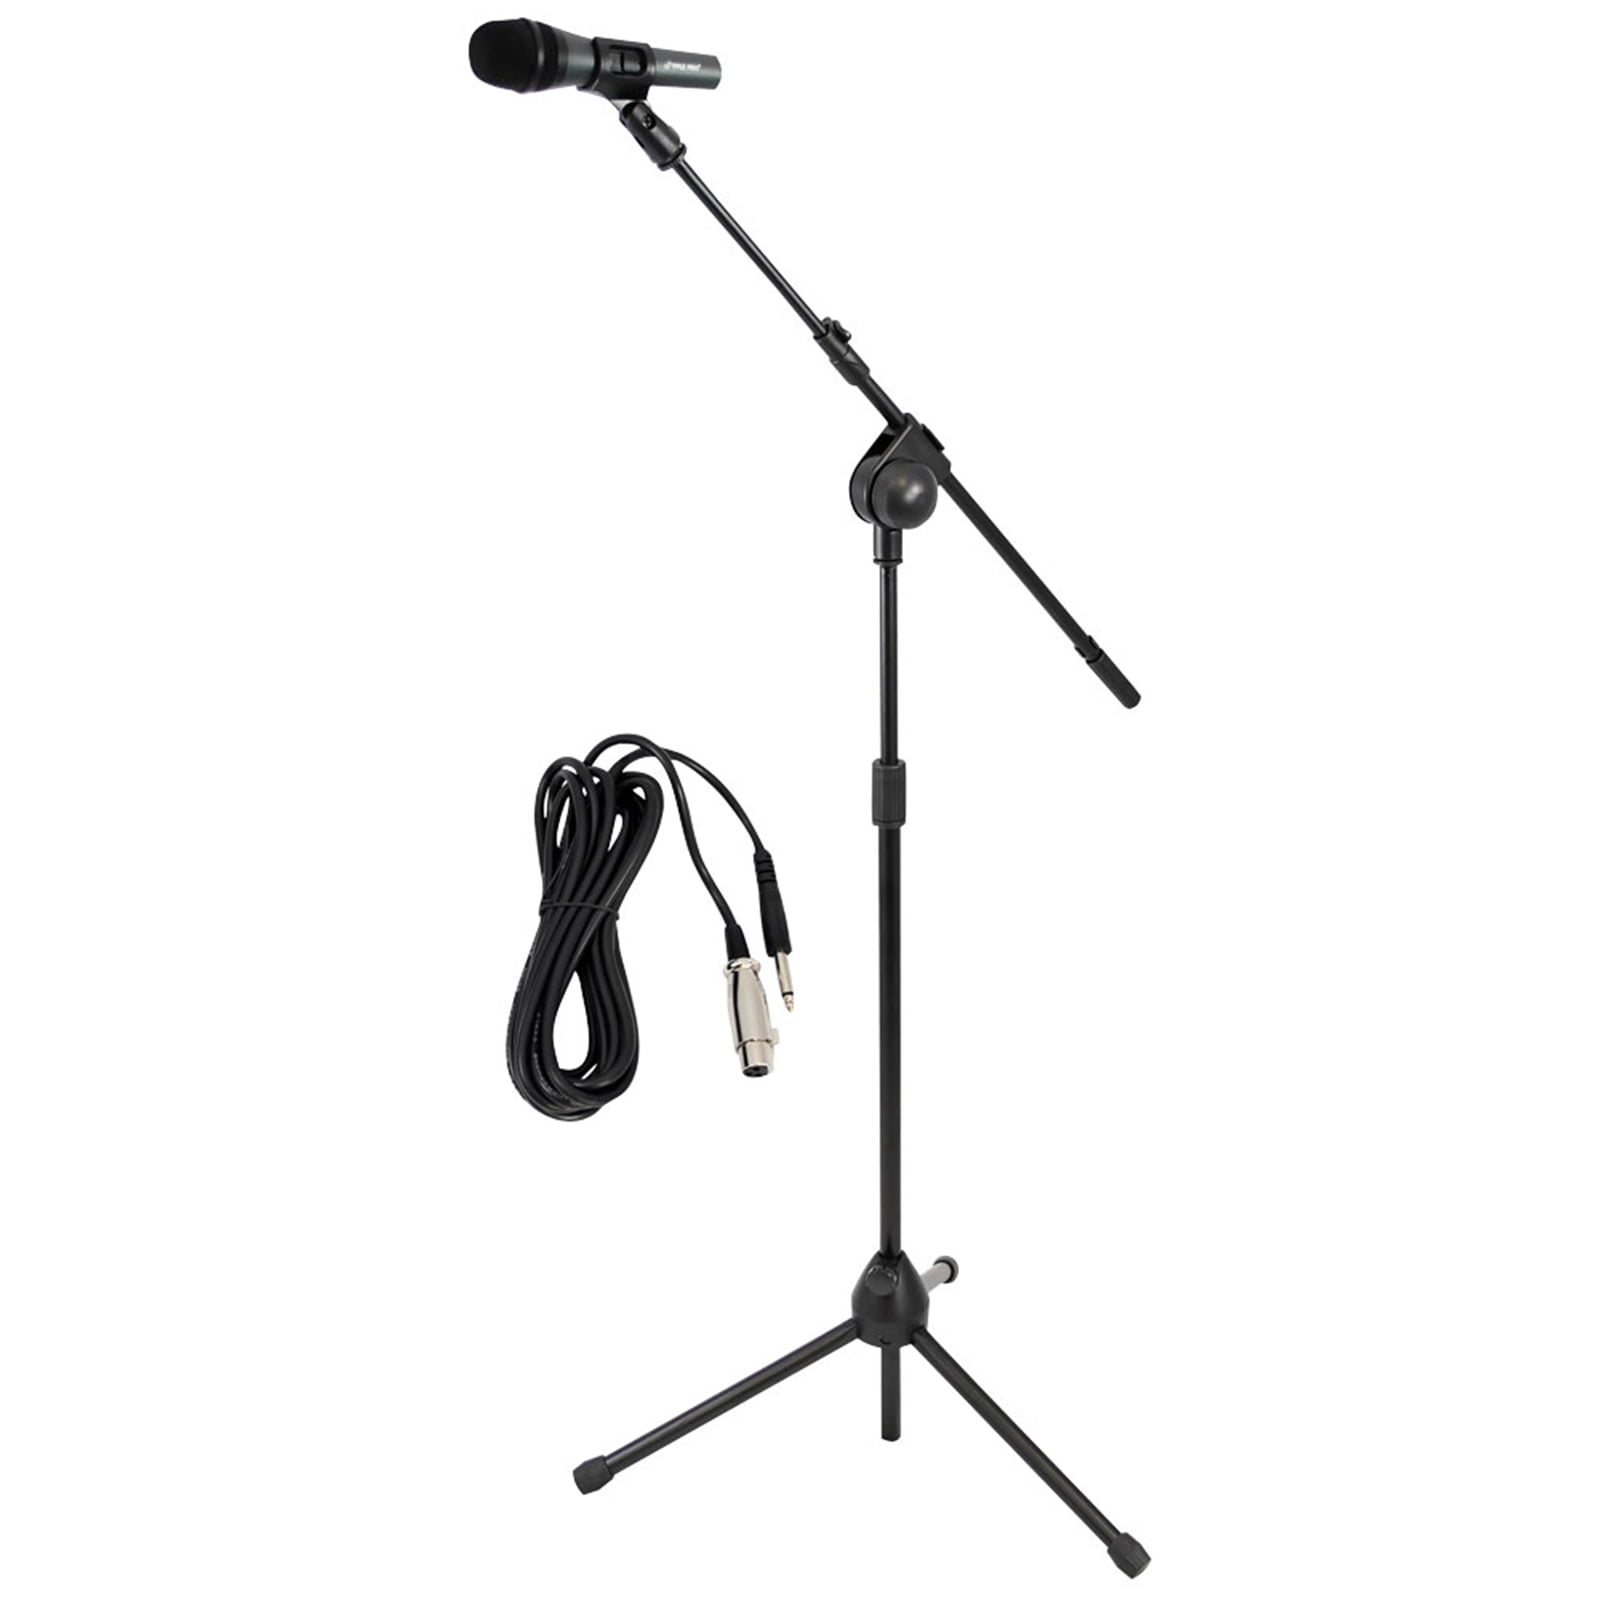 mic stands